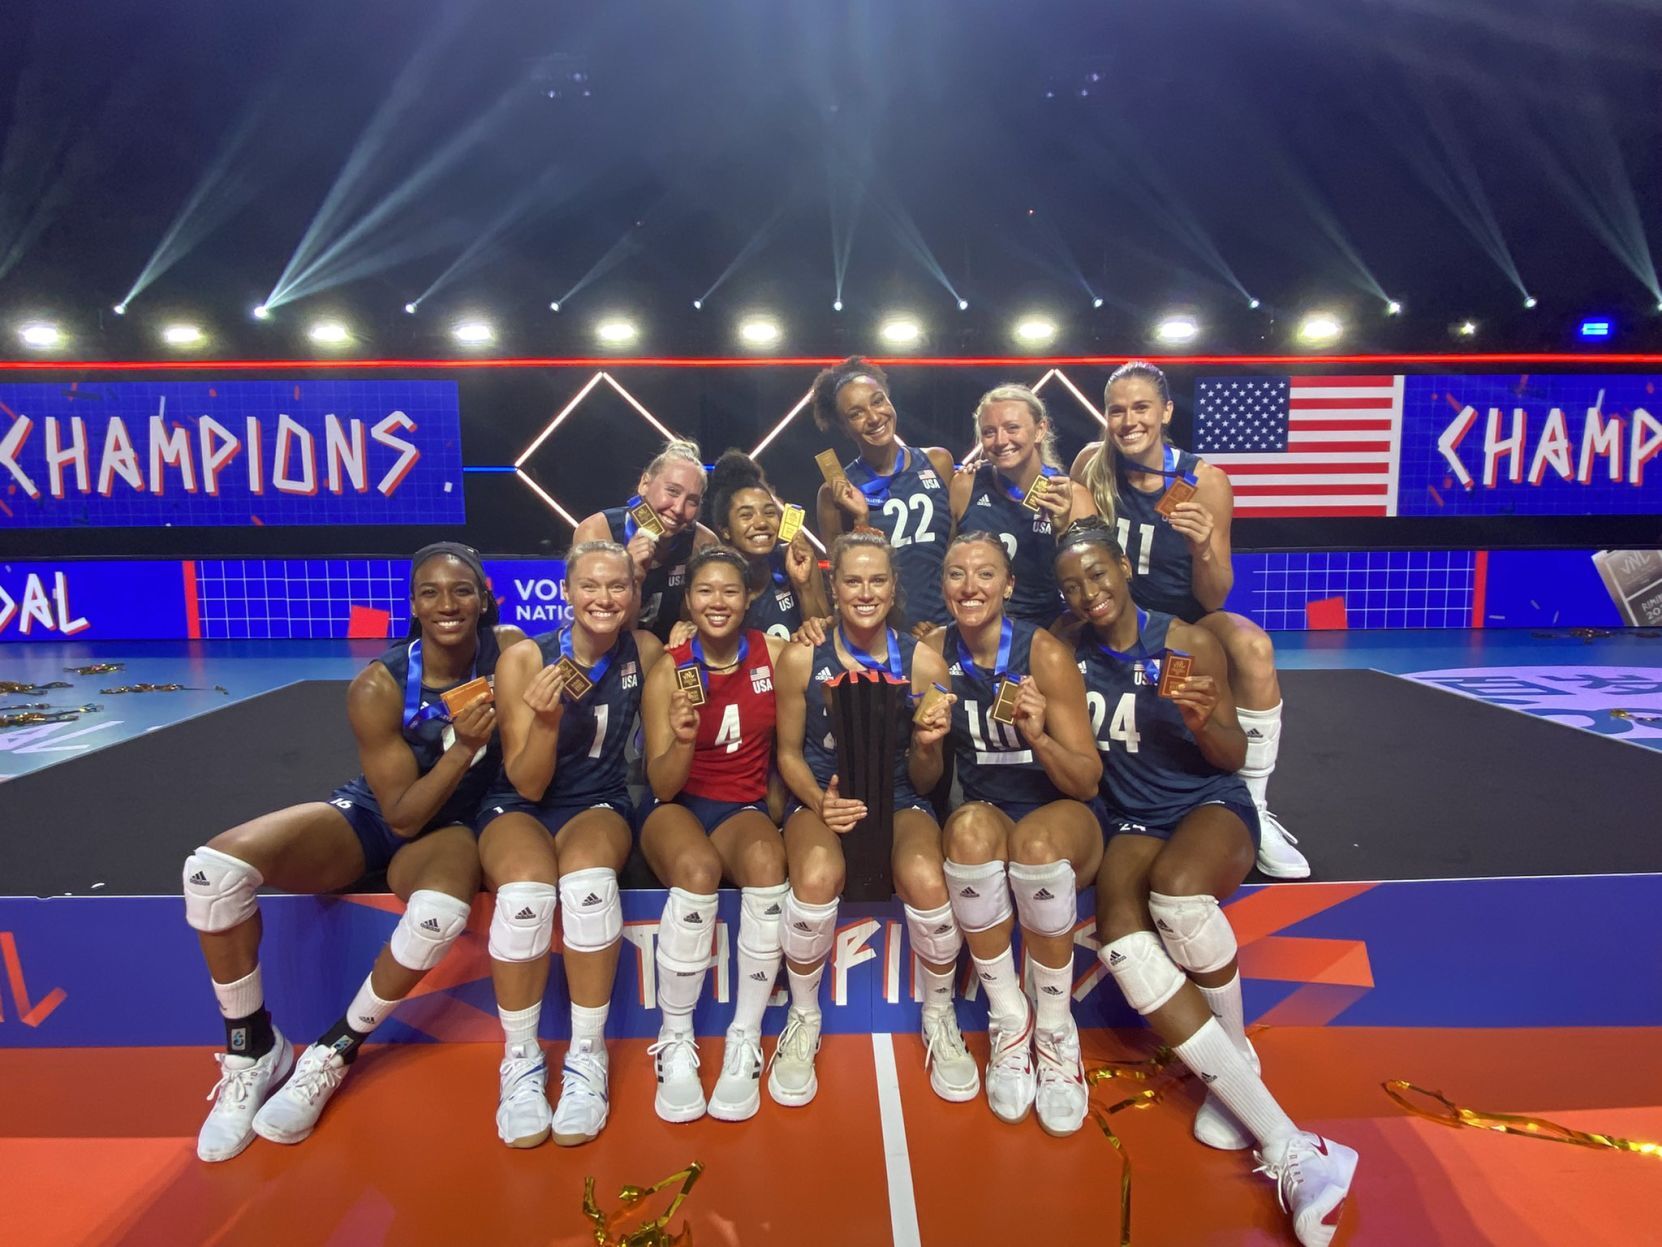 USA volleyball wins third straight VNL title; Wong-Orantes named tourneys top libero